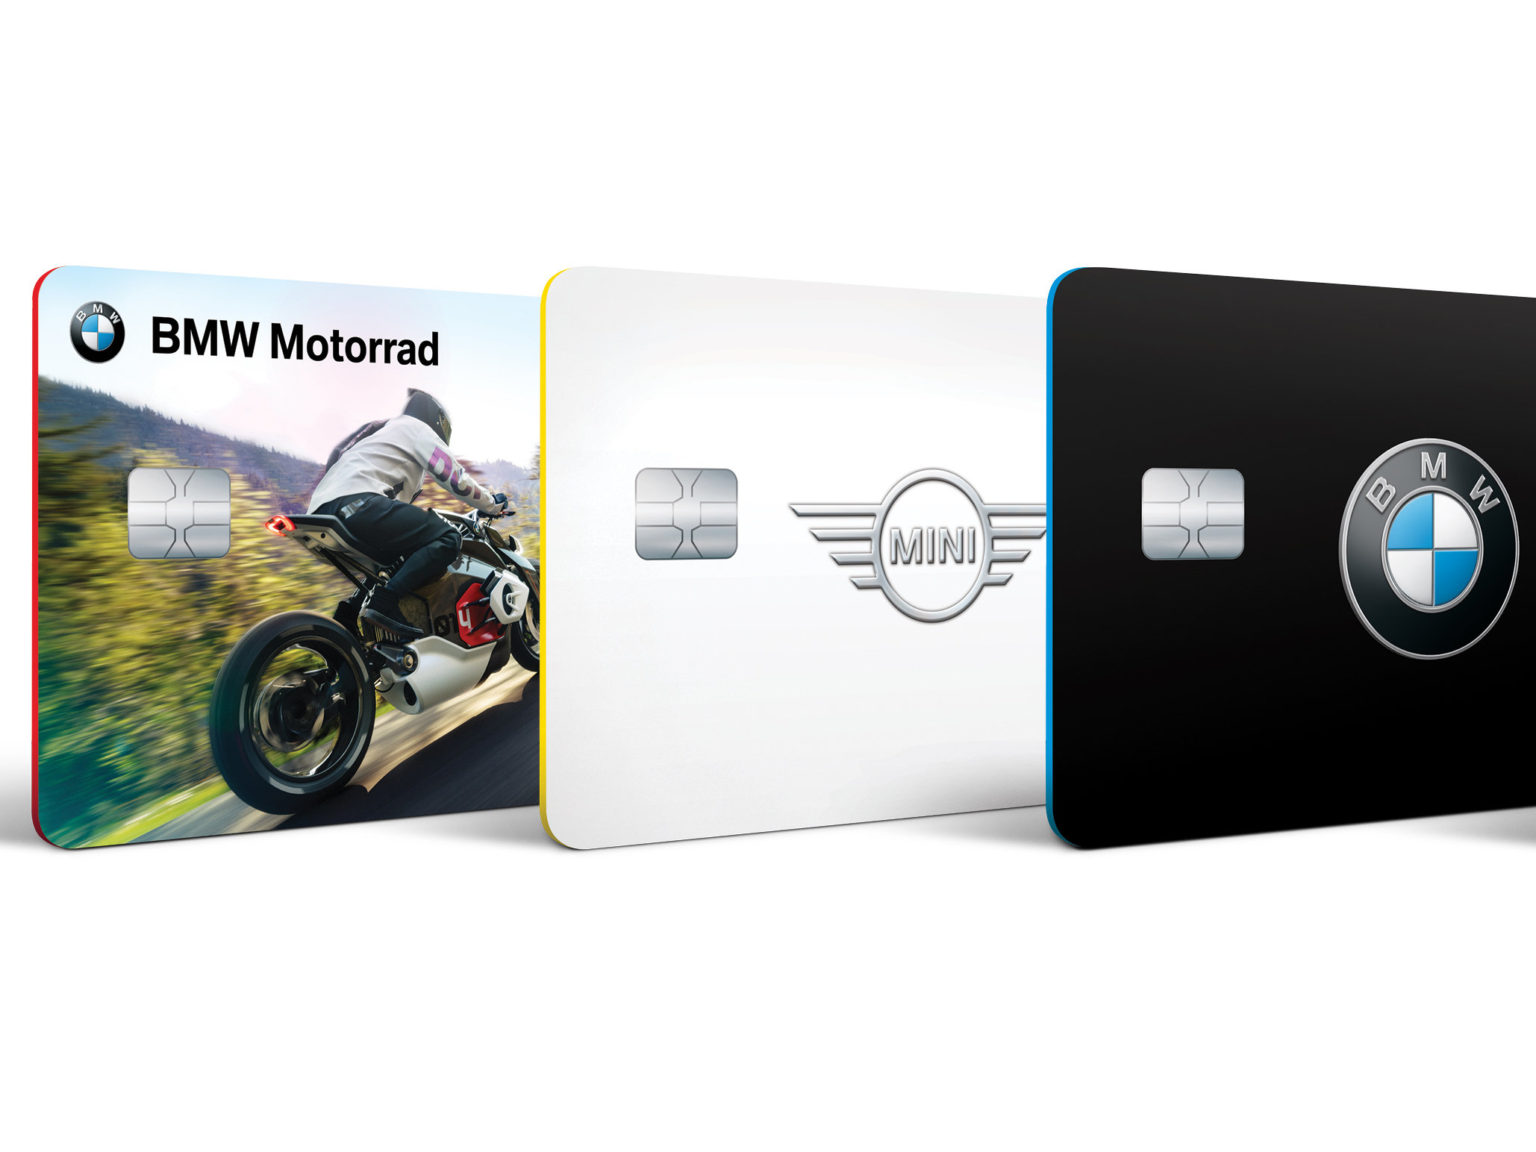 BMW and MINI brands now offer a Mastercard credit card, which gives users a variety of rewards.